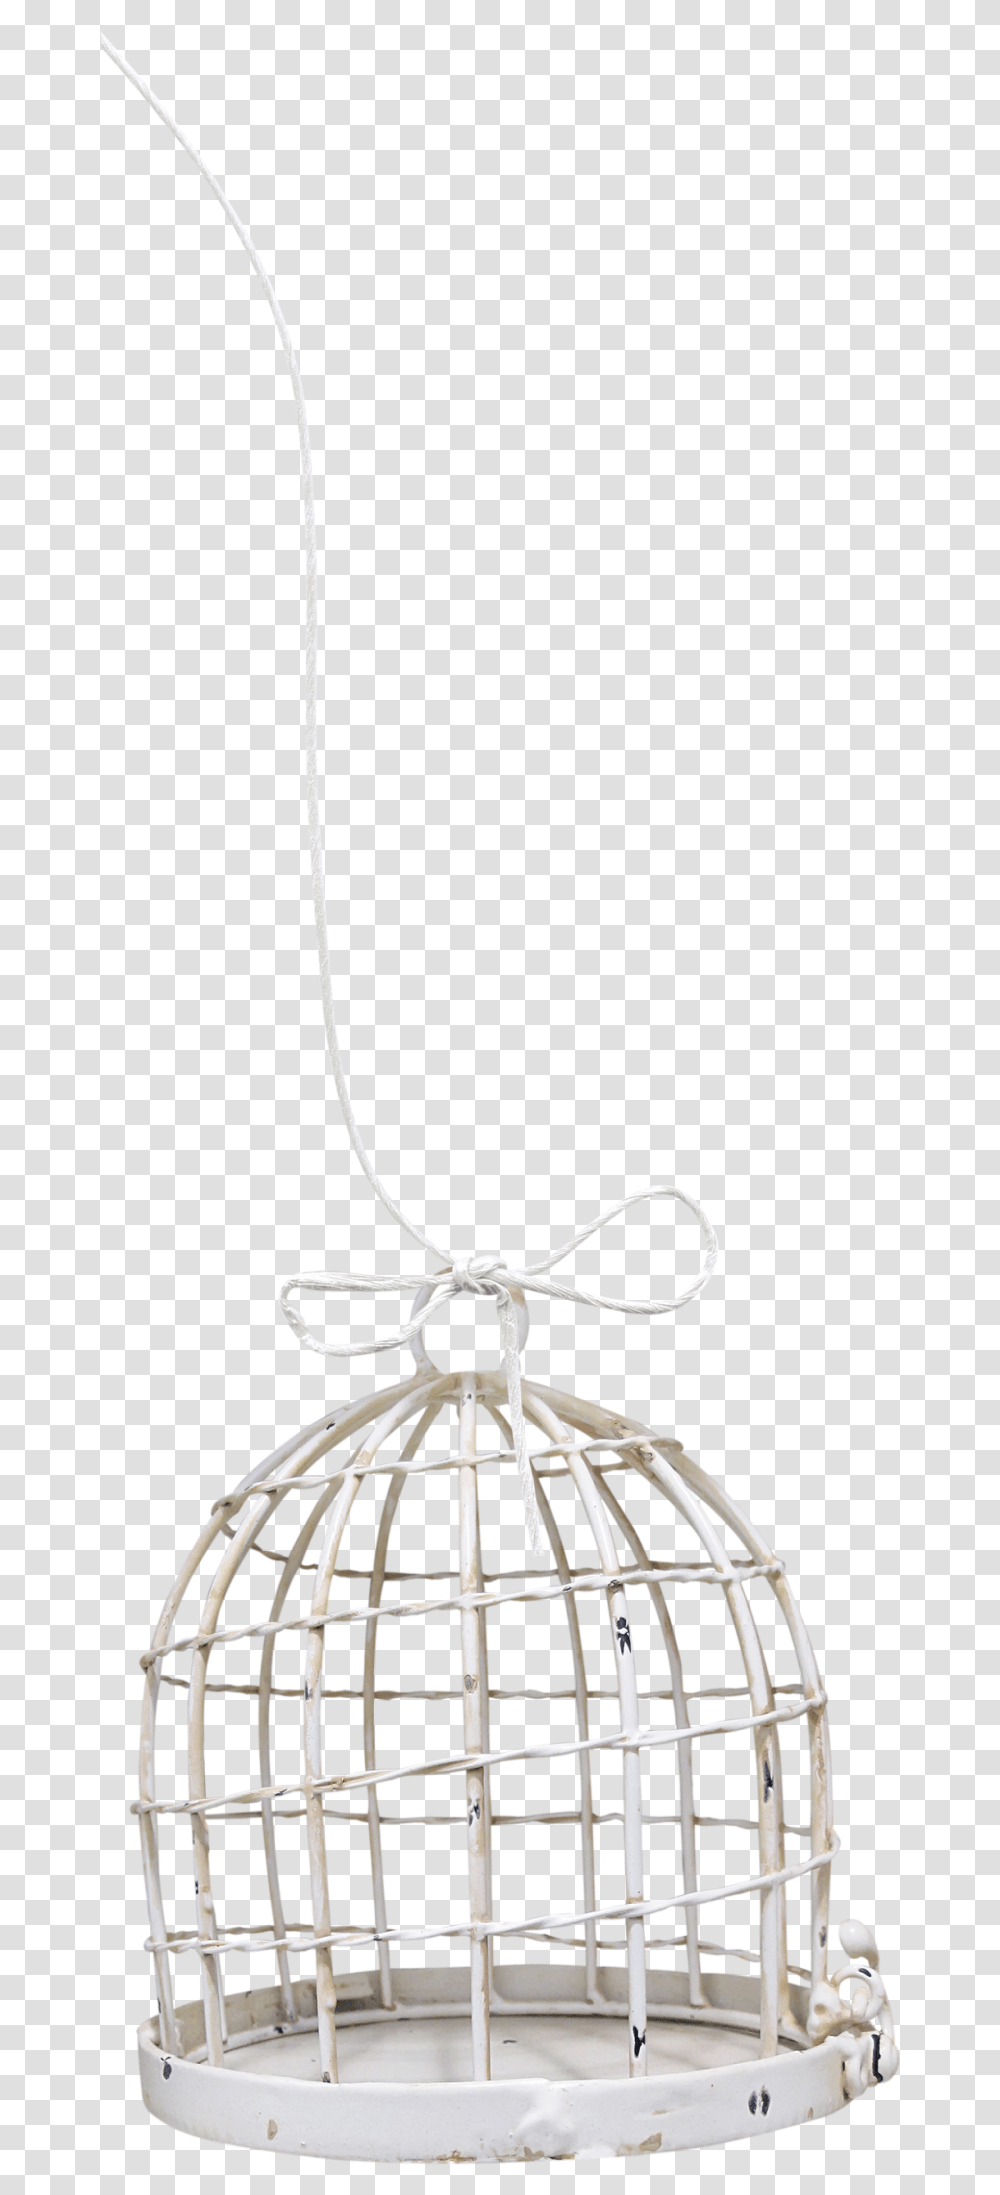 Bird Cage Image Purepng Free Cc0 Solid, Crystal, Linen, Home Decor, Cushion Transparent Png